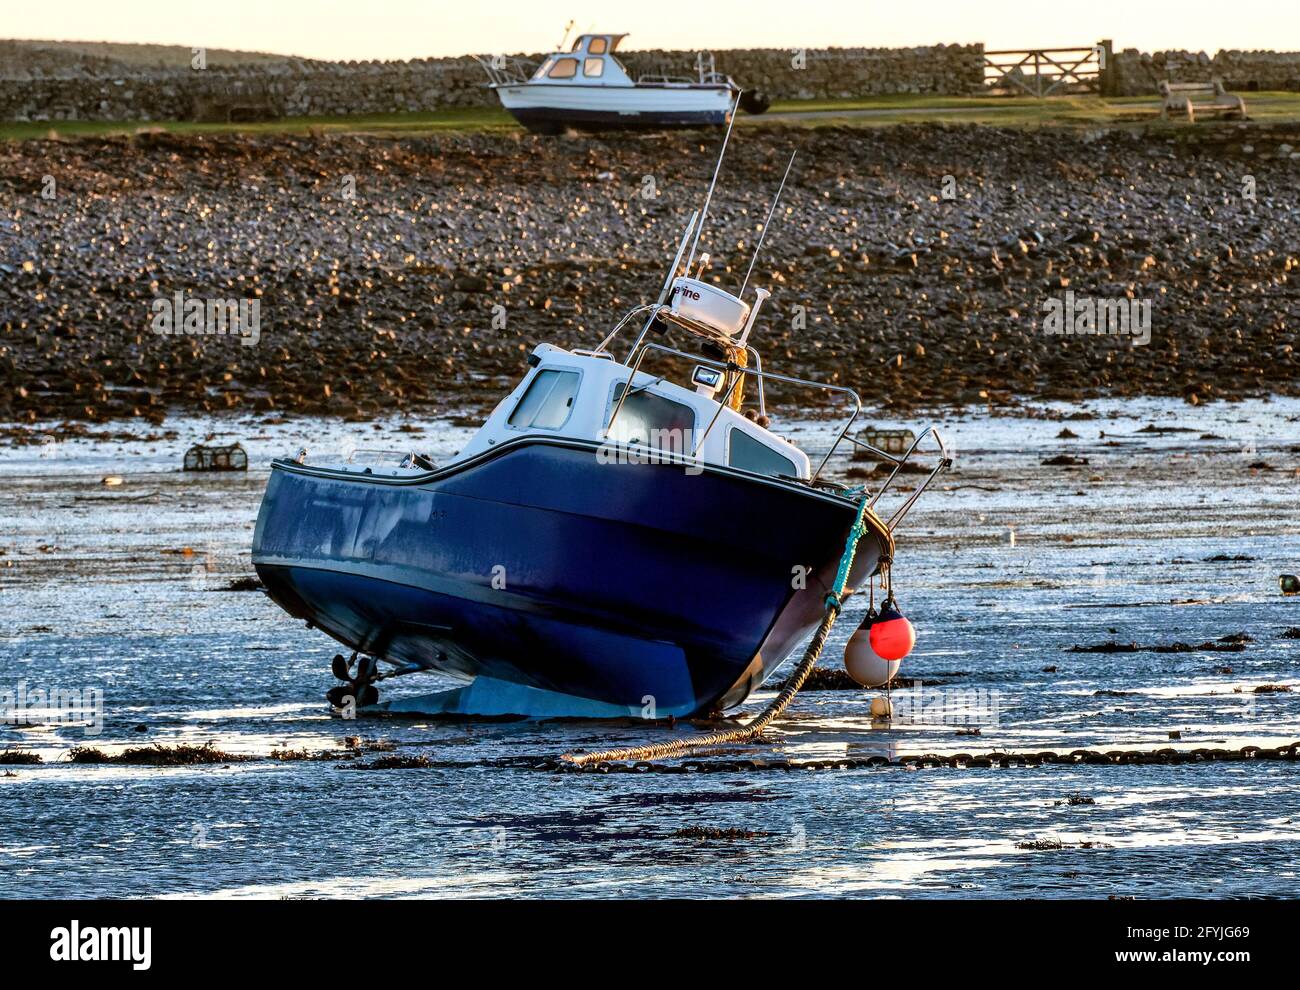 Boat listing on its side at low tide Stock Photo